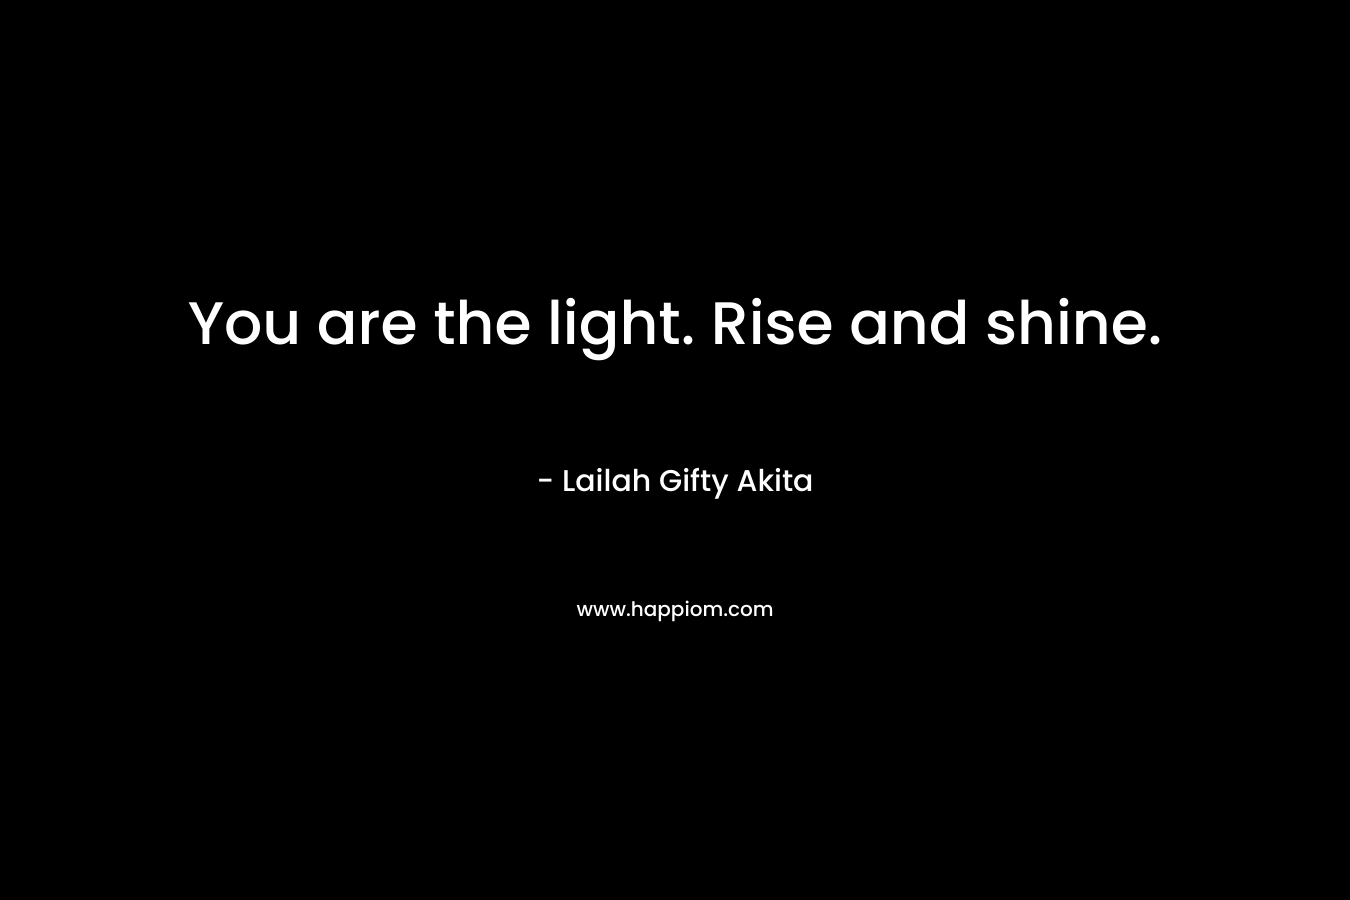 You are the light. Rise and shine.